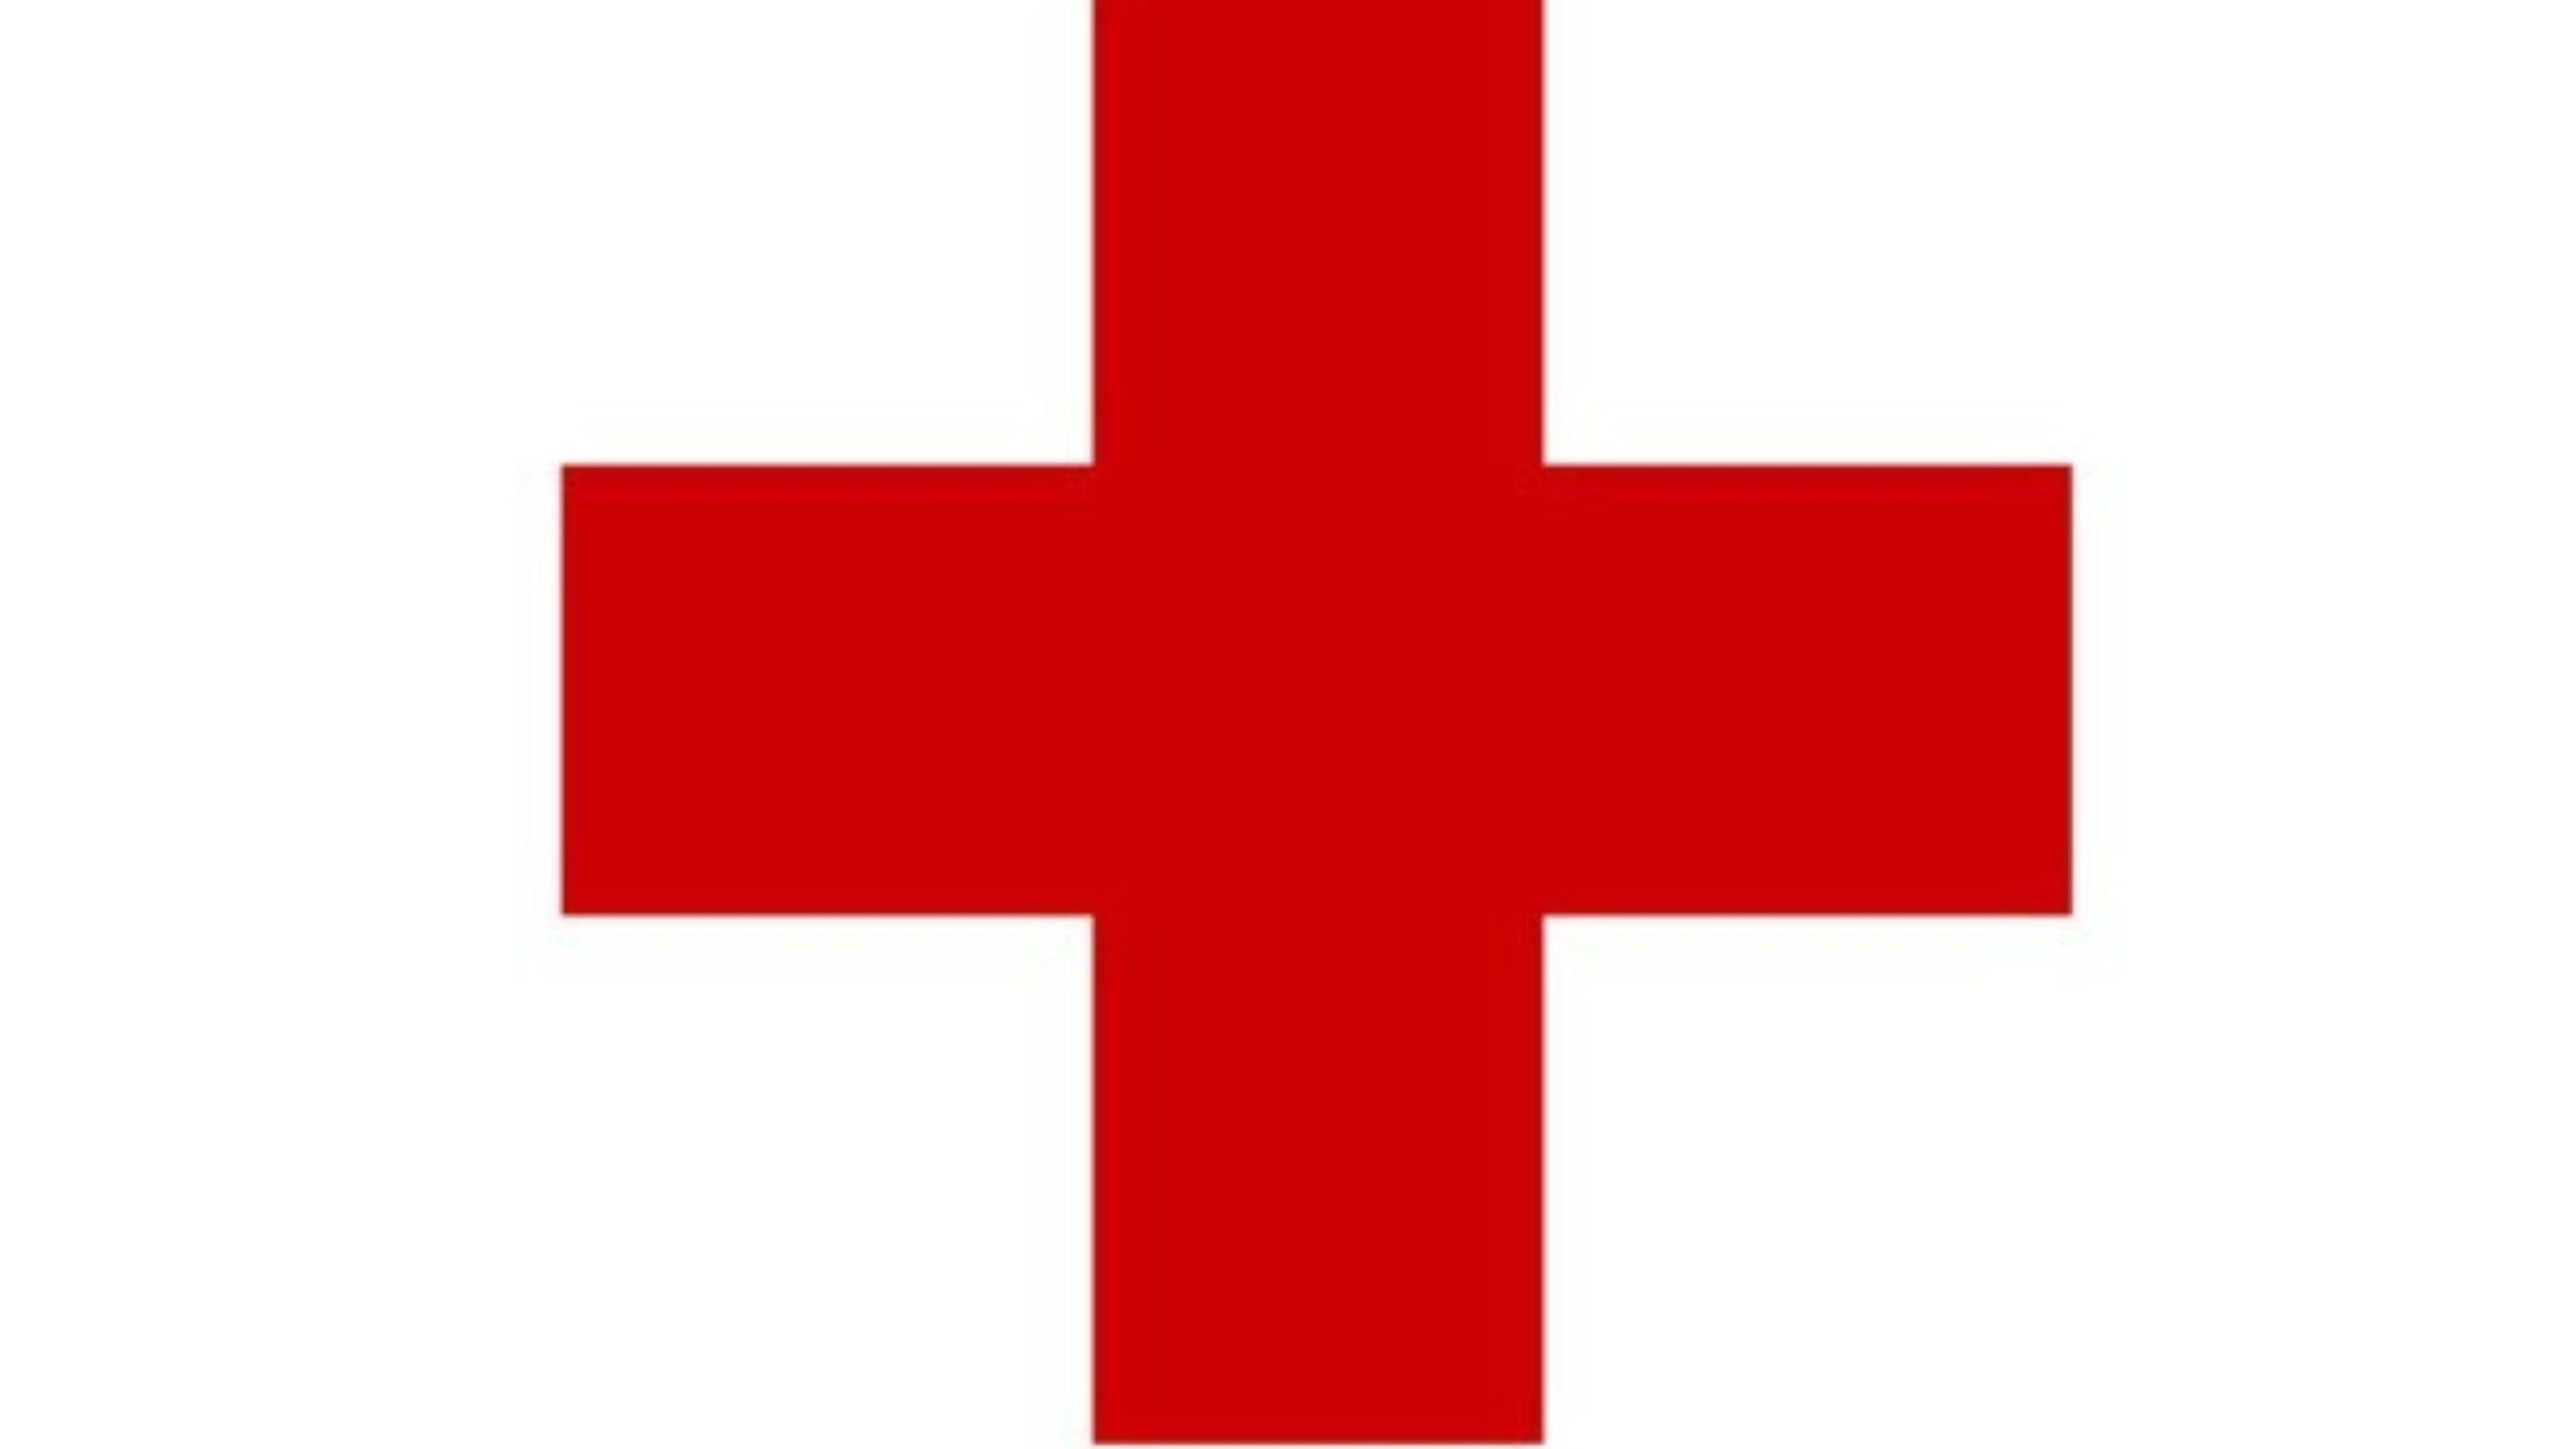 American Red Cross Logo - Logos for american red cross logo vector clipart free to use ...